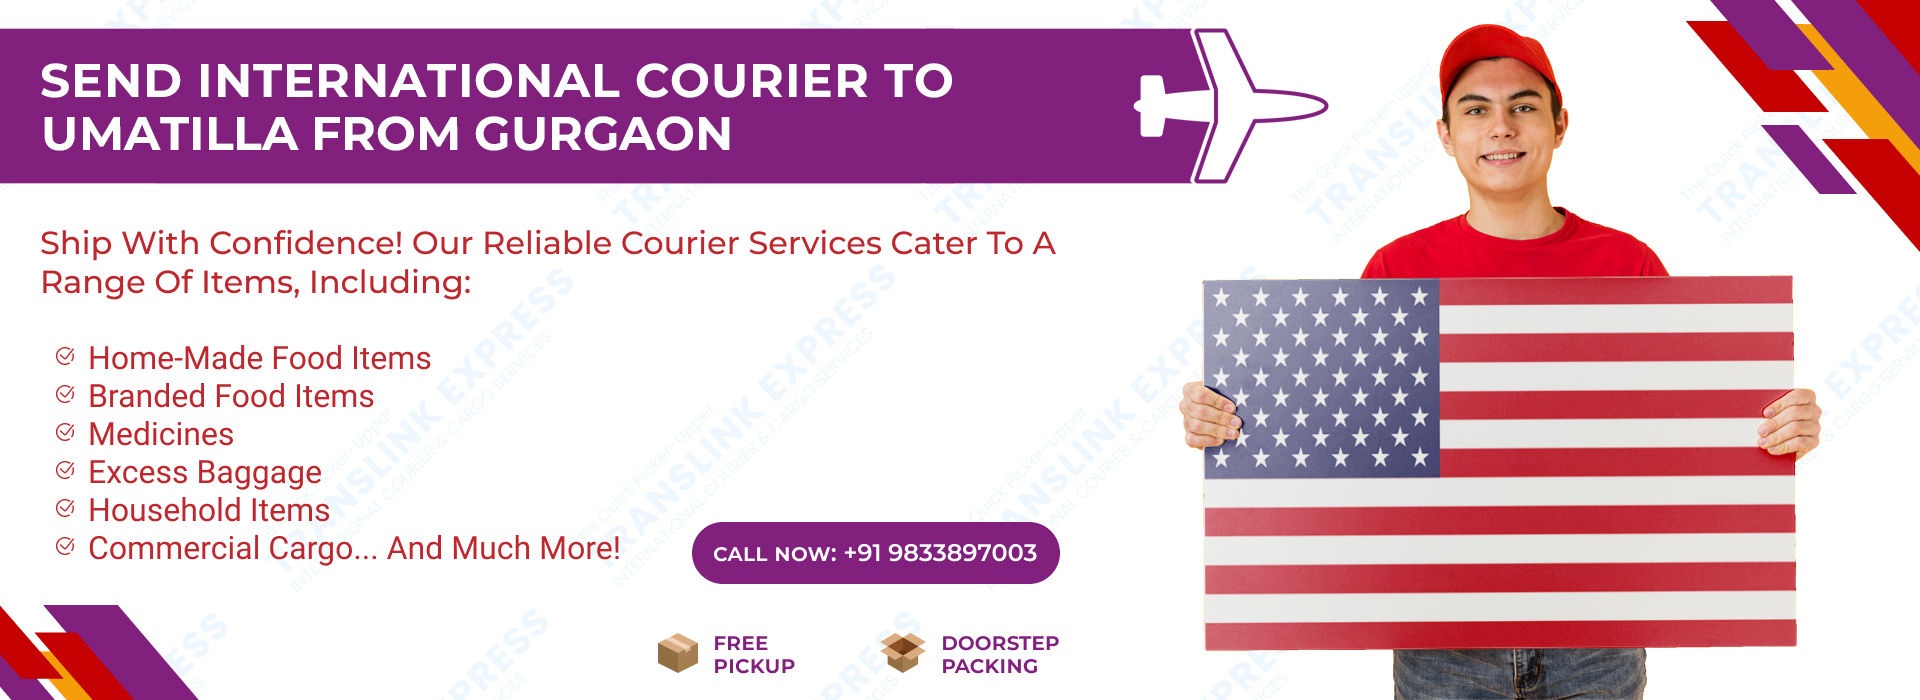 Courier to Umatilla From Gurgaon